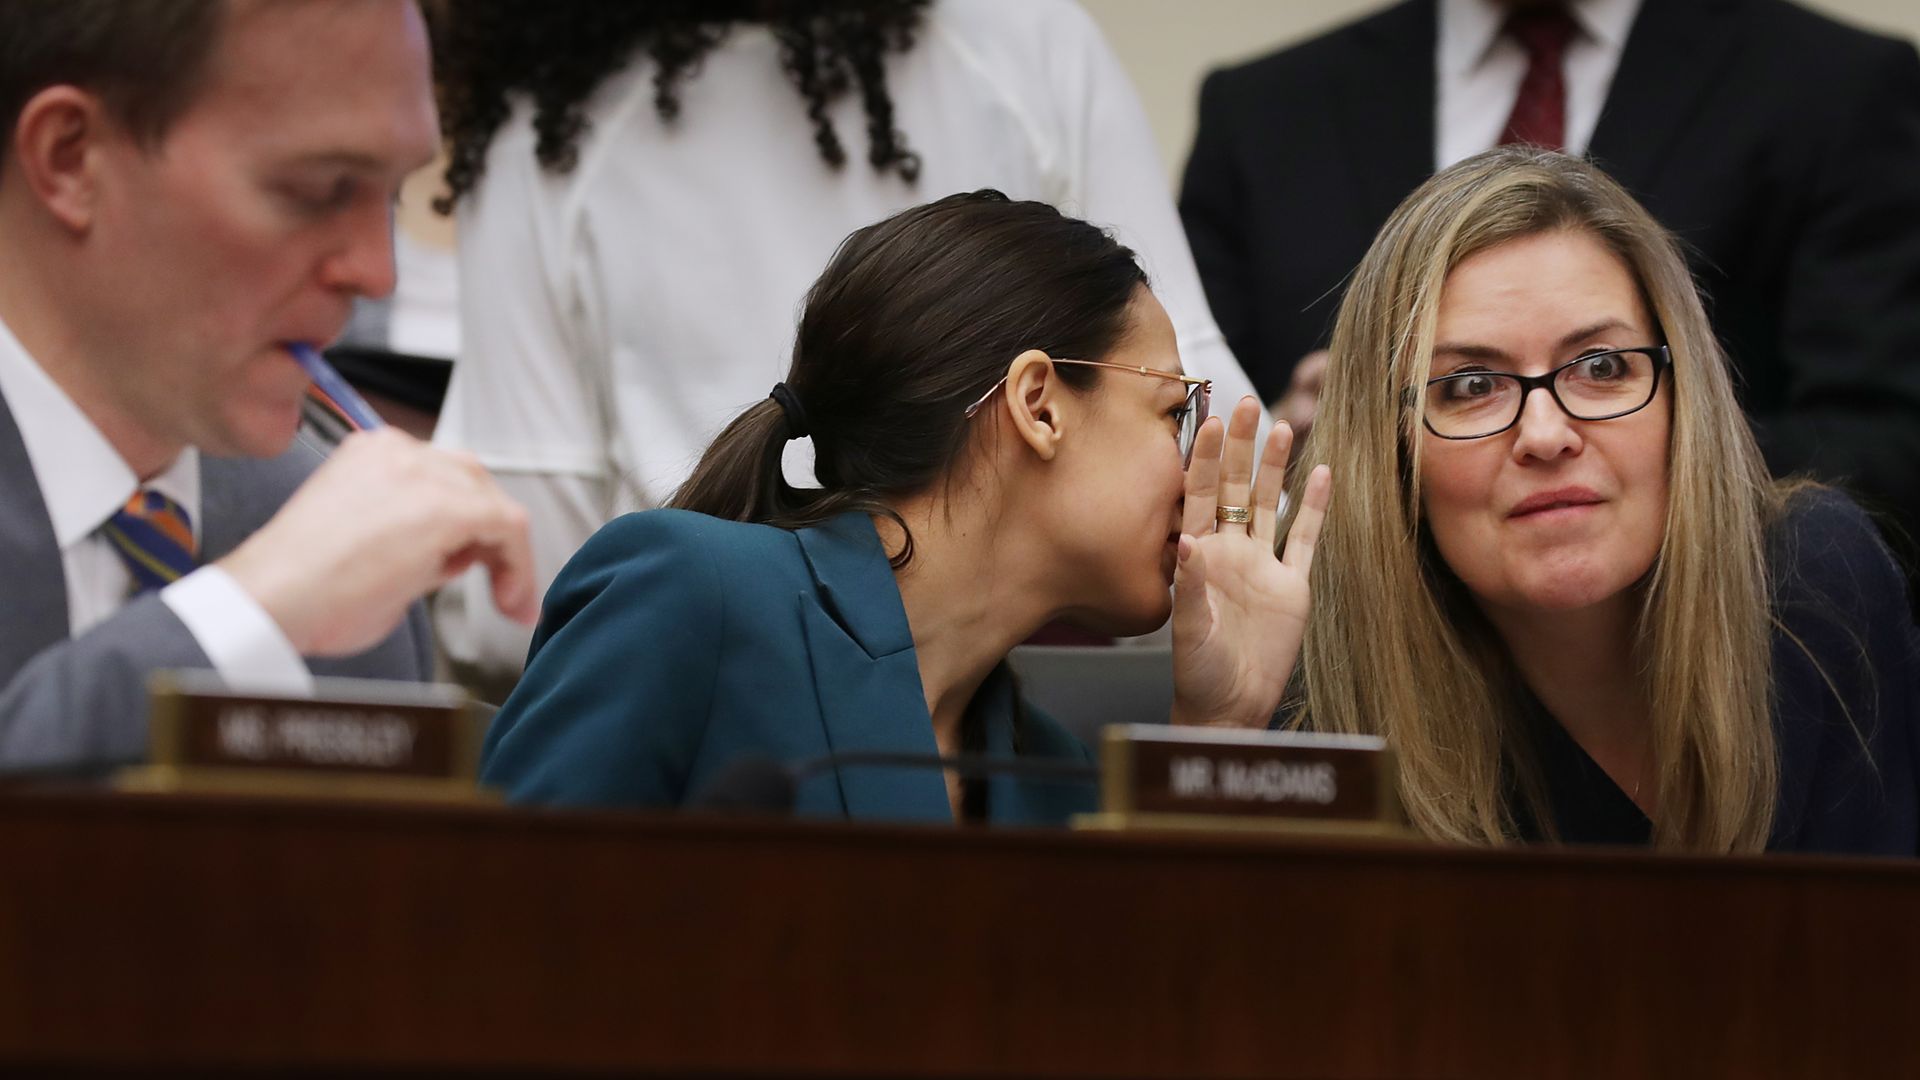 House Financial Services Committee members Rep. Alexandria Ocasio-Cortez (D-NY) (C) talks with Rep. Jennifer Wexton (D-VA) while hearing testimony from former Wells Fargo and Company CEO Timothy Sloan